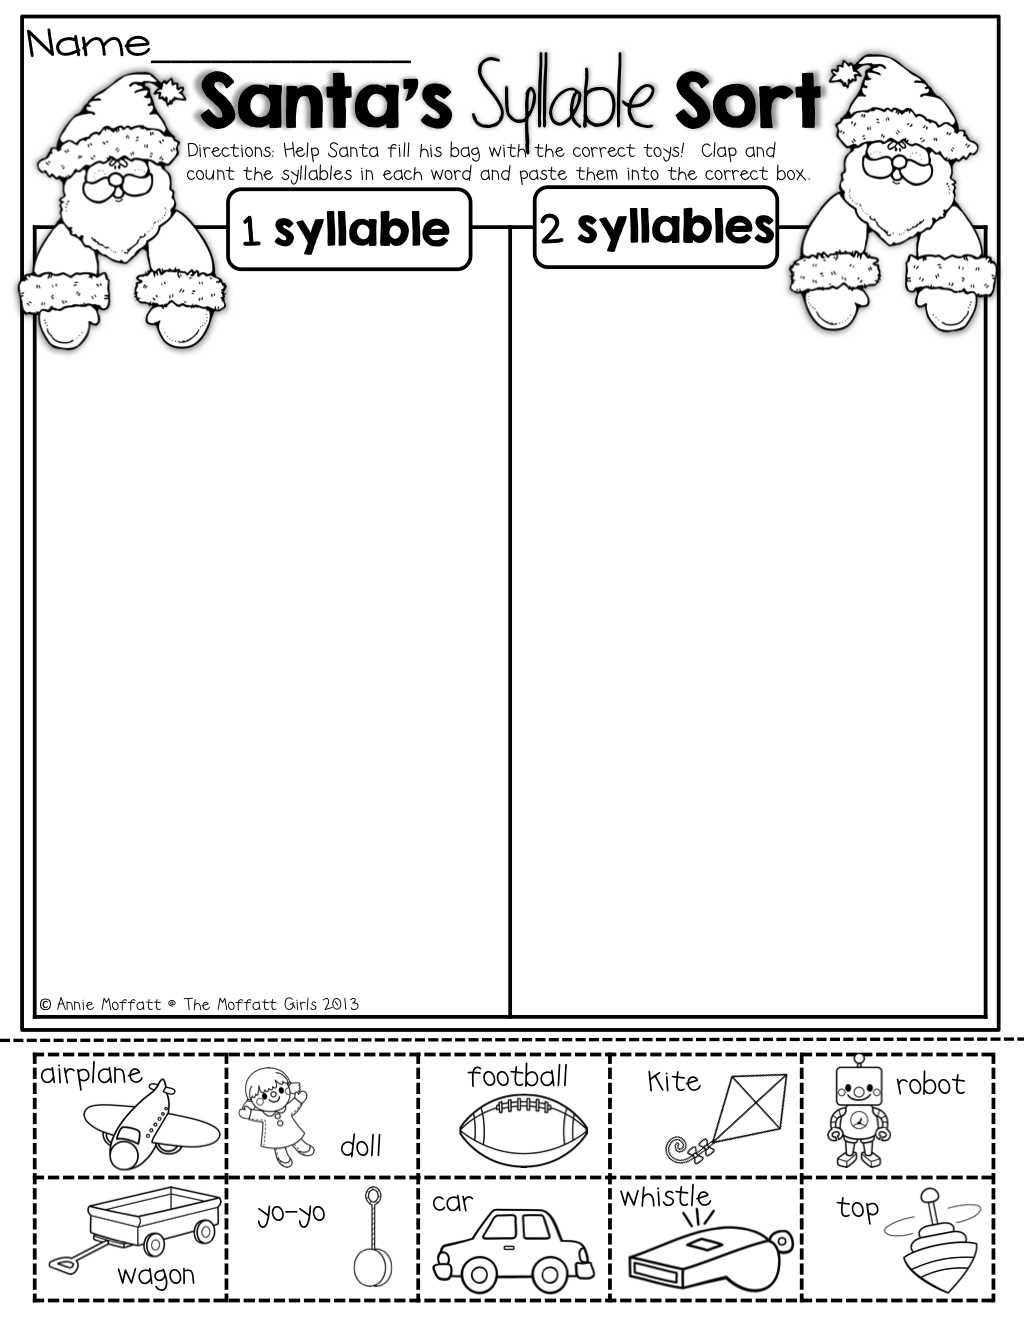 Character Education Worksheets Pdf Also Spanish Syllables Worksheets Worksheets for All